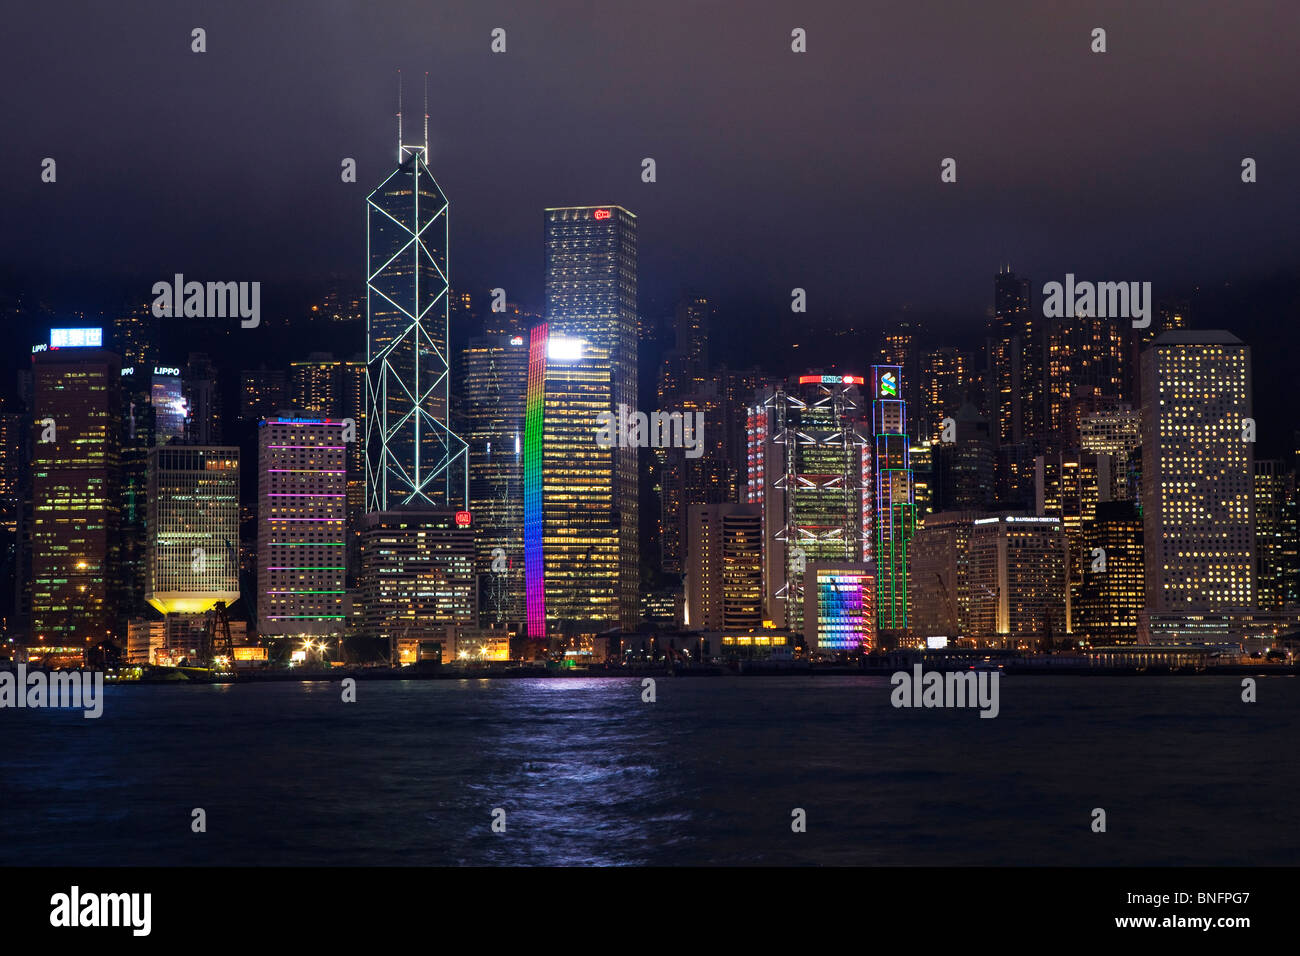 Tall buildings on Hong Kong Island city centre as seen across the harbour from Tsim Sha Tsui on Kowloon side at night Stock Photo